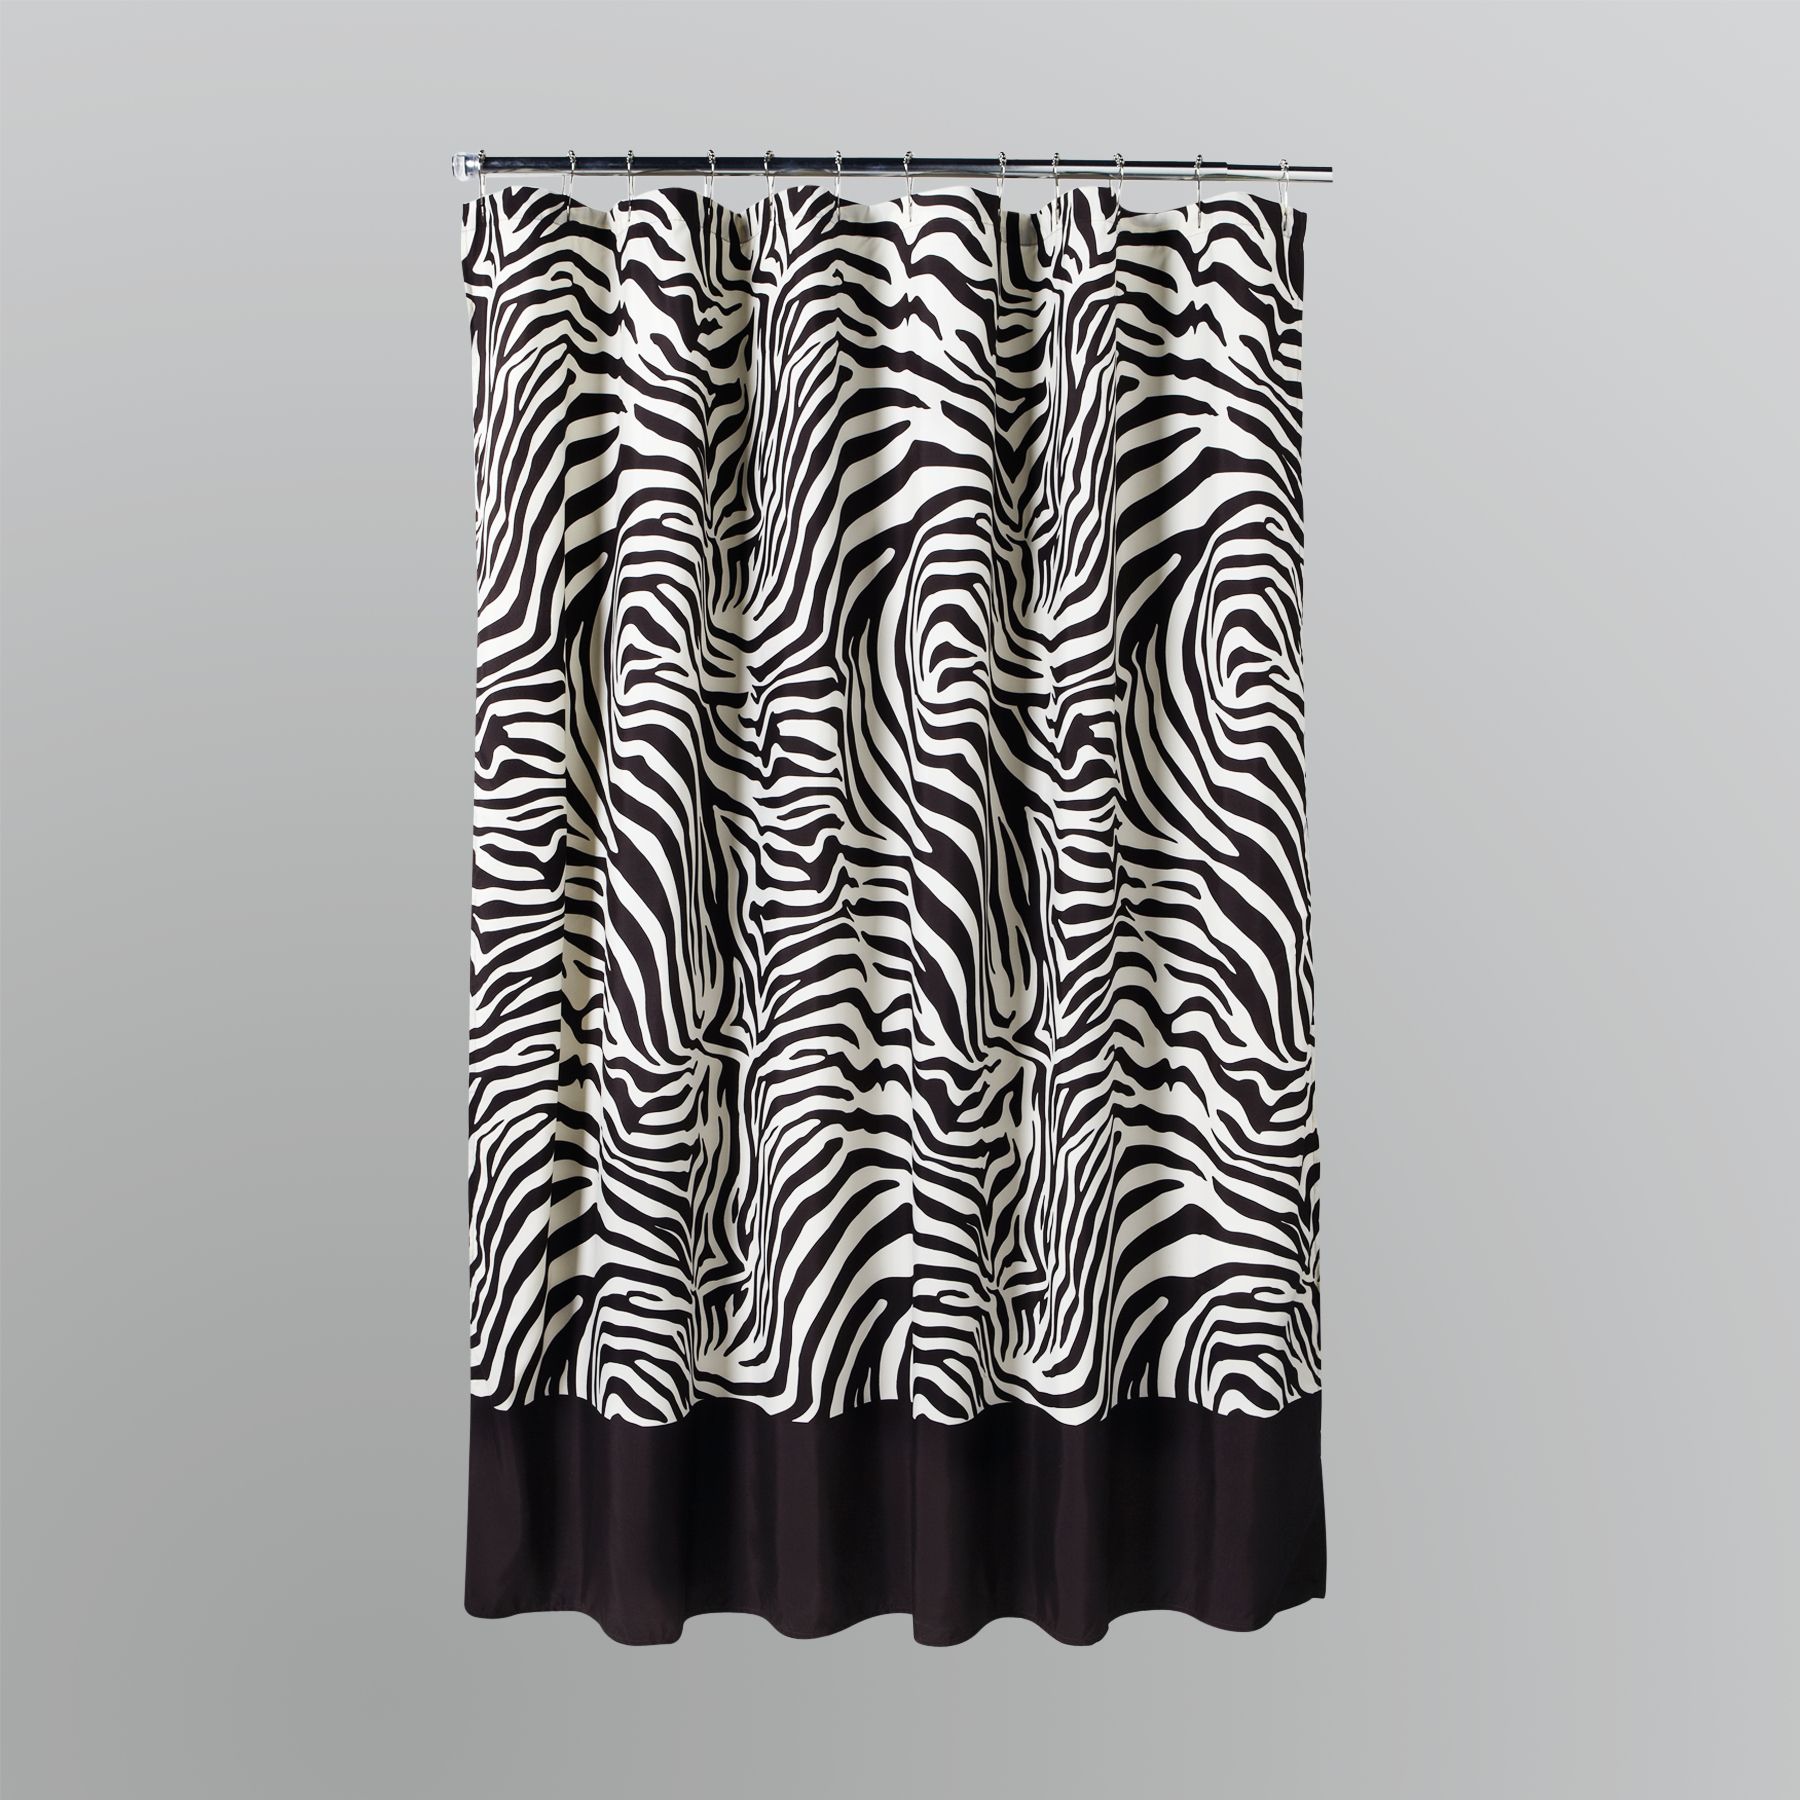 Home Solutions Kenya Shower Curtain